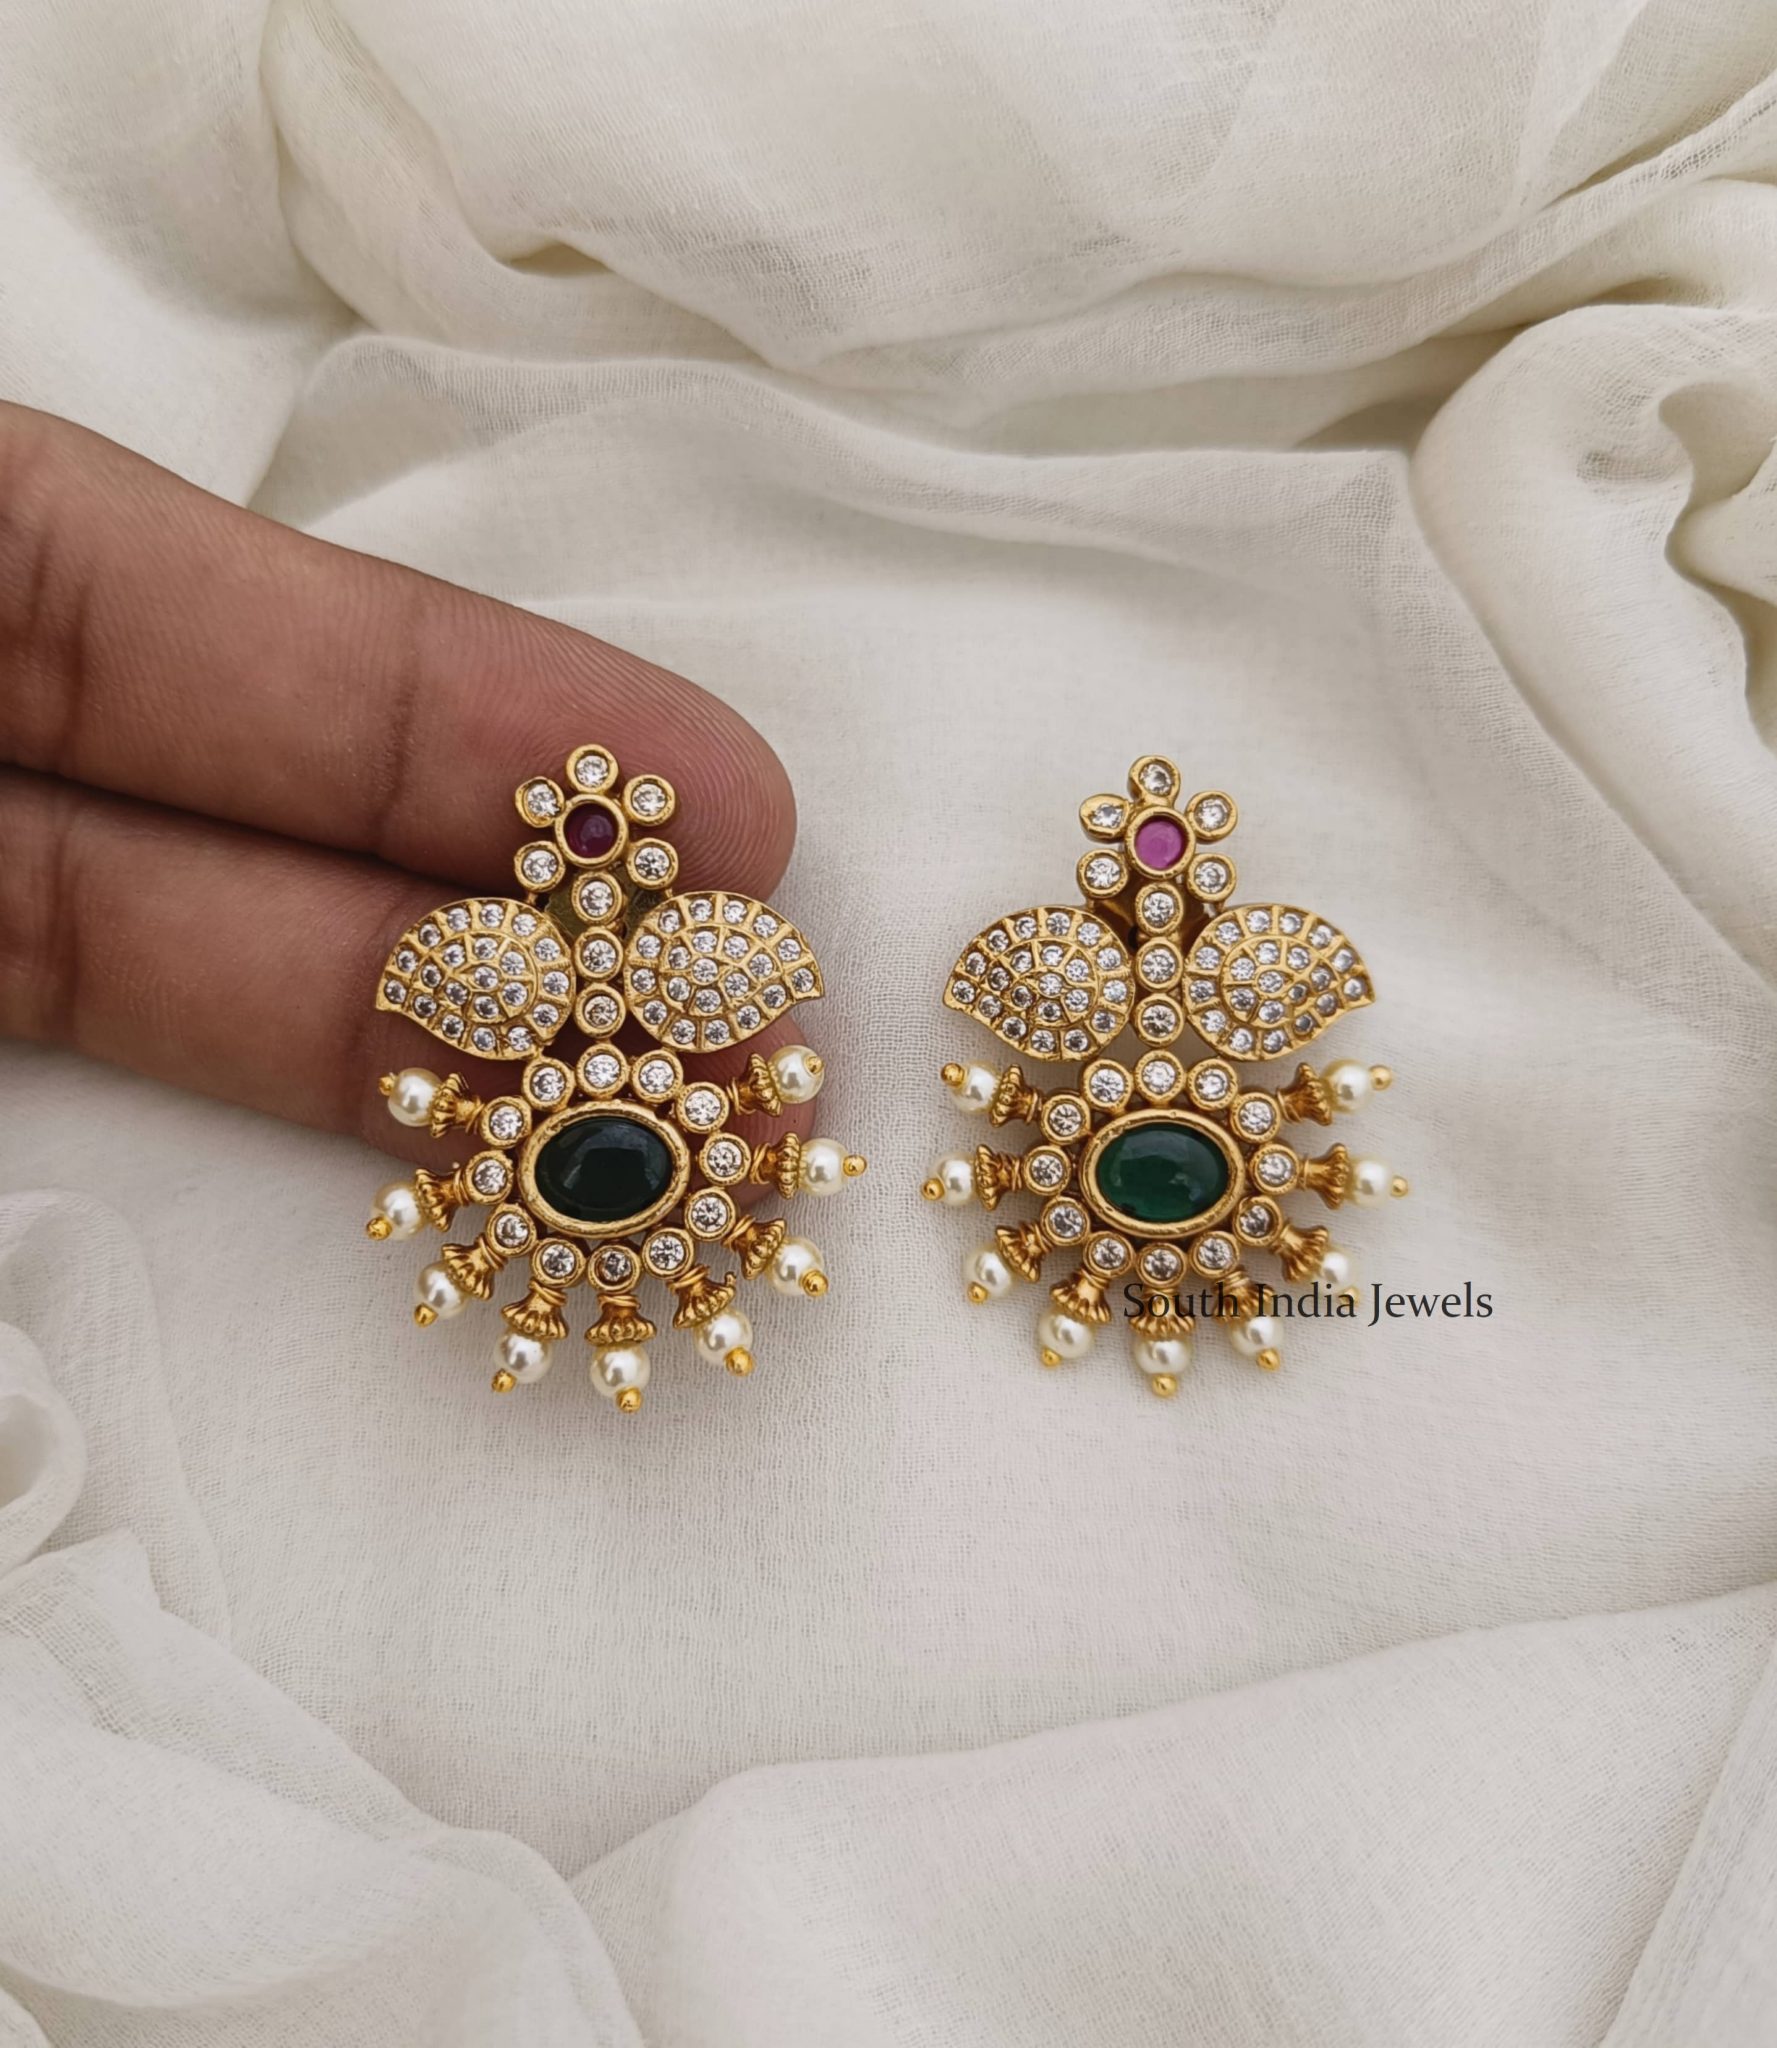 Floral AD Design Earrings- South India Jewels Online Stores.